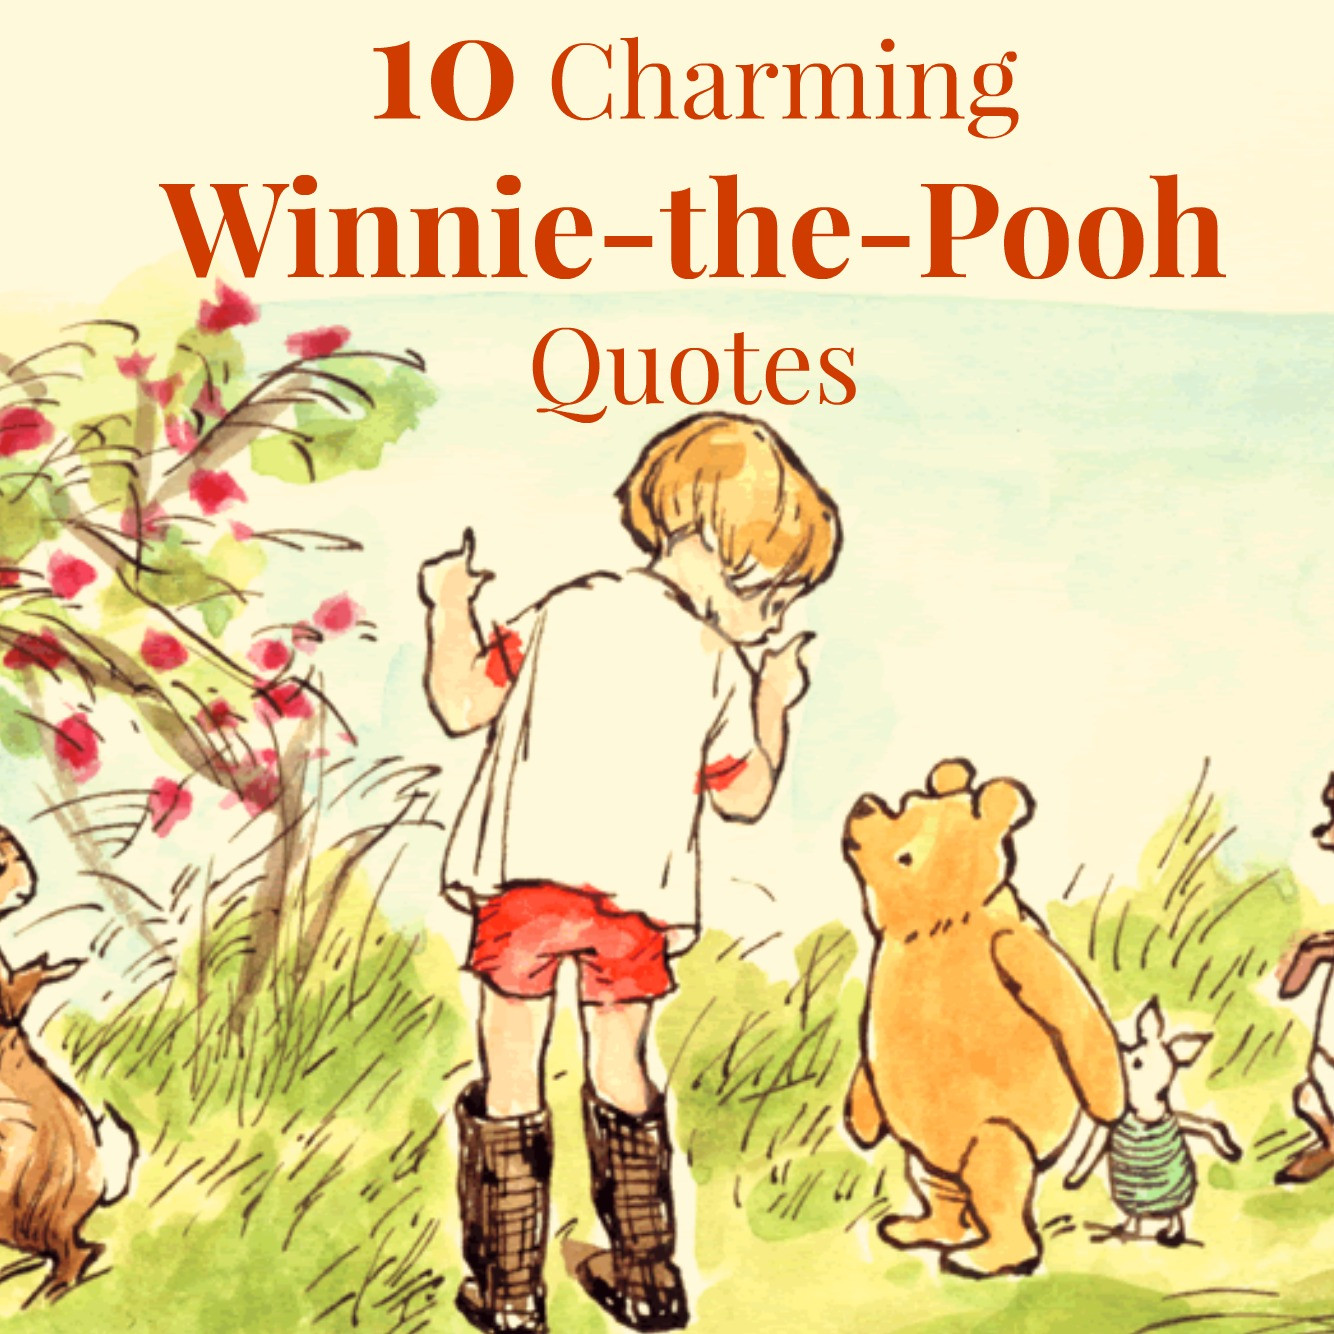 Winnie The Pooh Quotes Friendship
 Winnie The Pooh Quotes QuotesGram